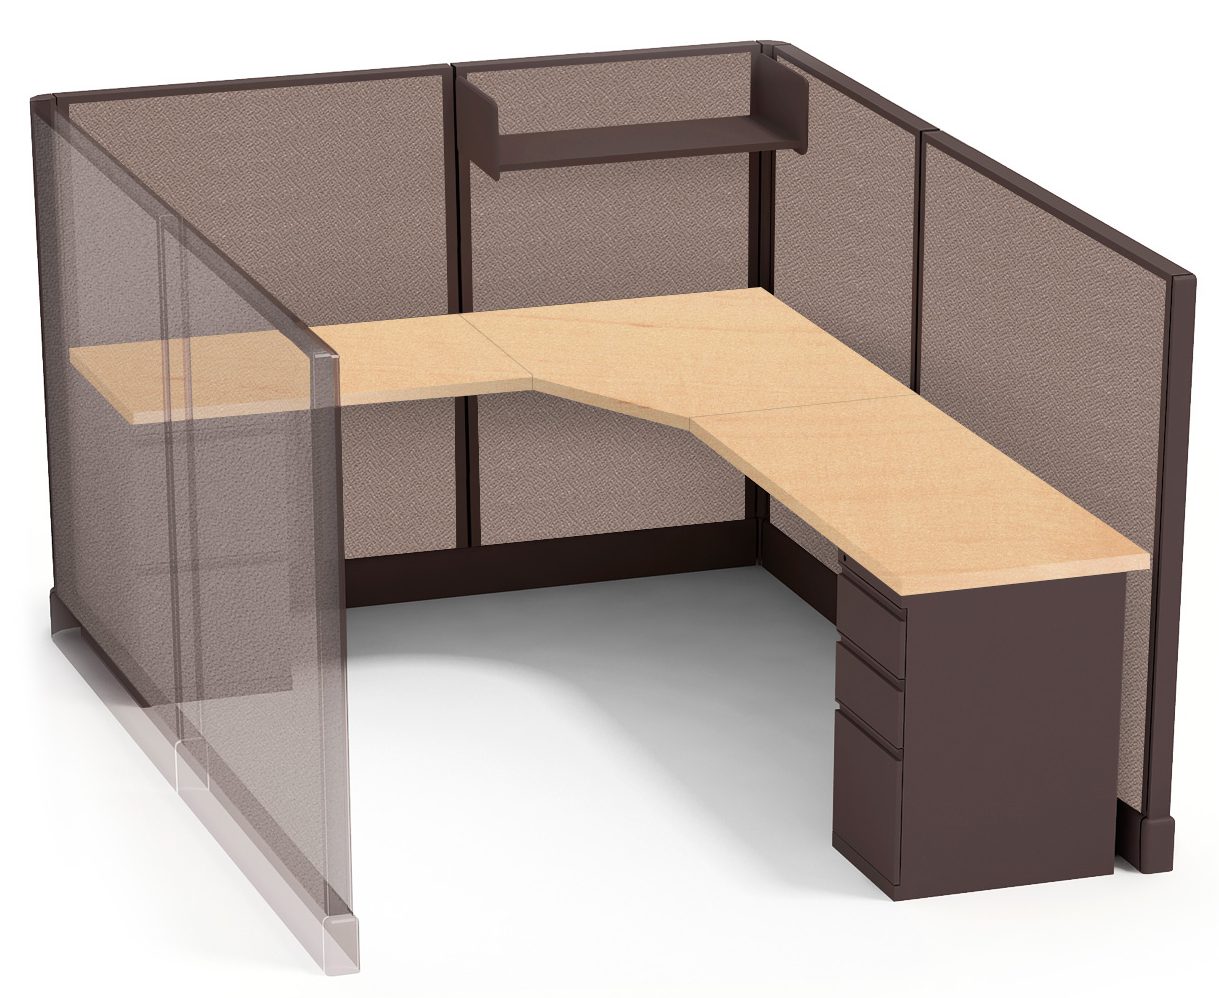 Cubicle Panel Systems | Office Cubicle Configurations